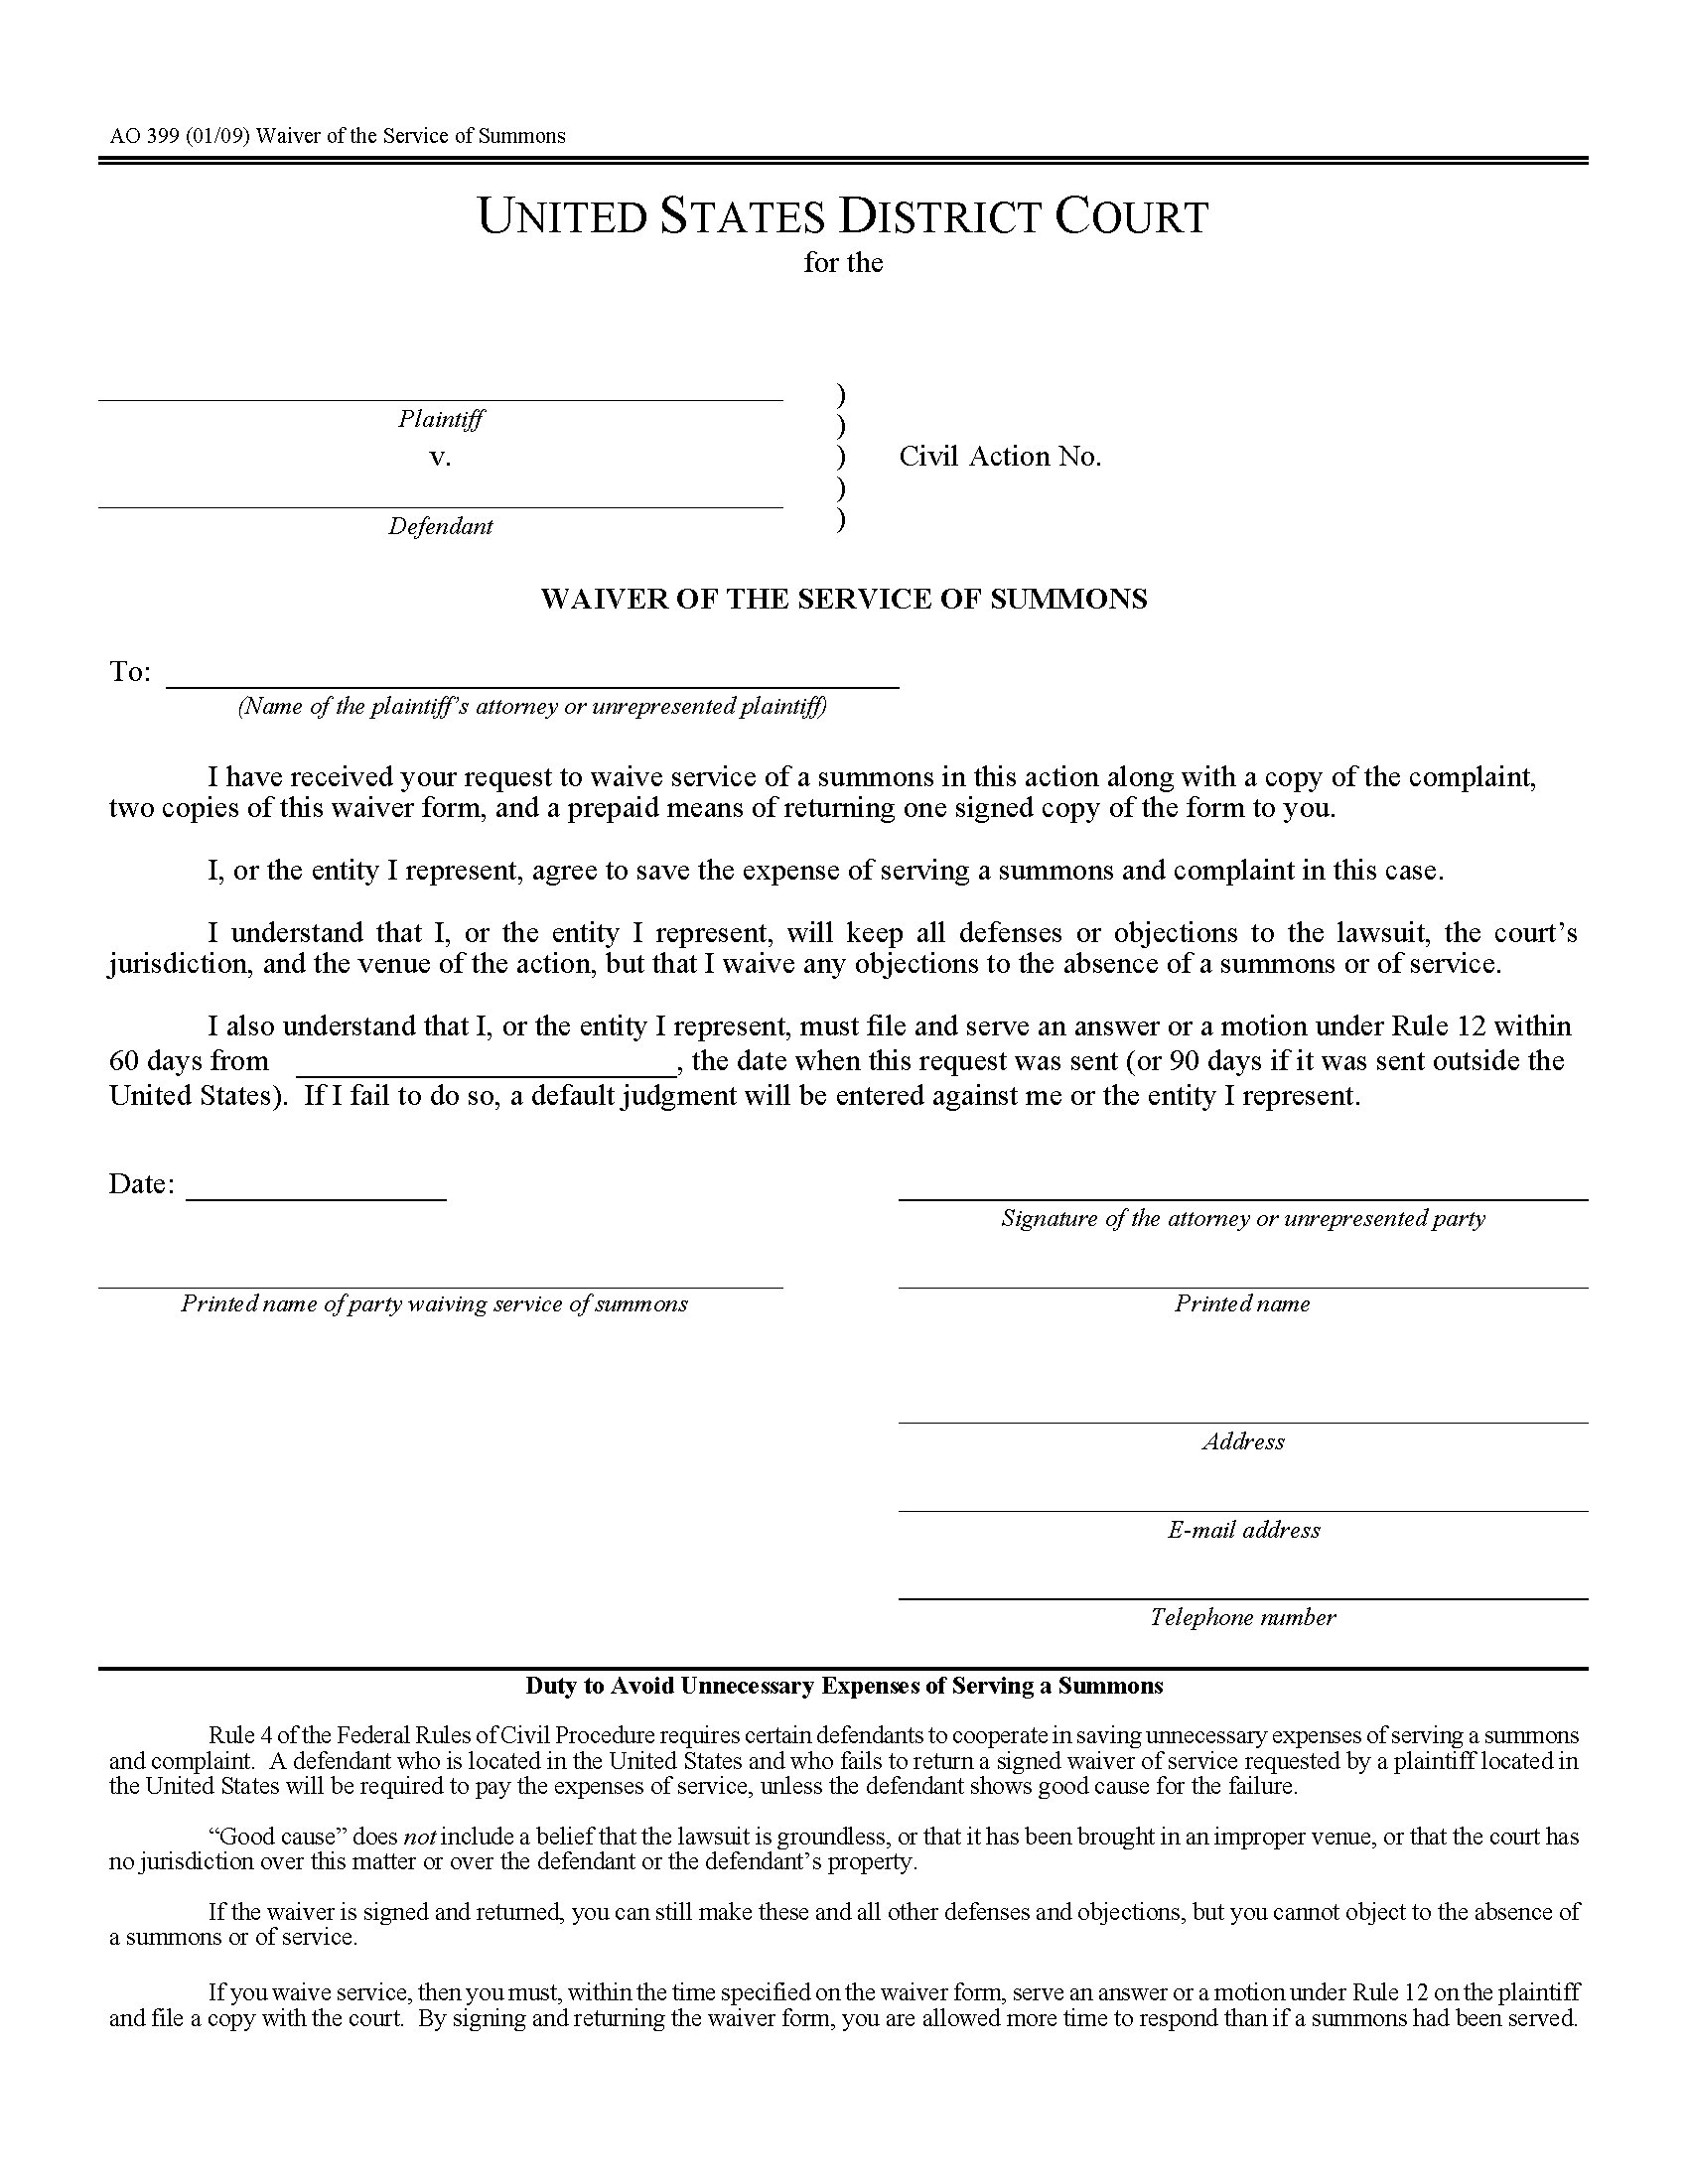 USA Waiver Of Service Of Summons Form AO399 Legal Forms And Business